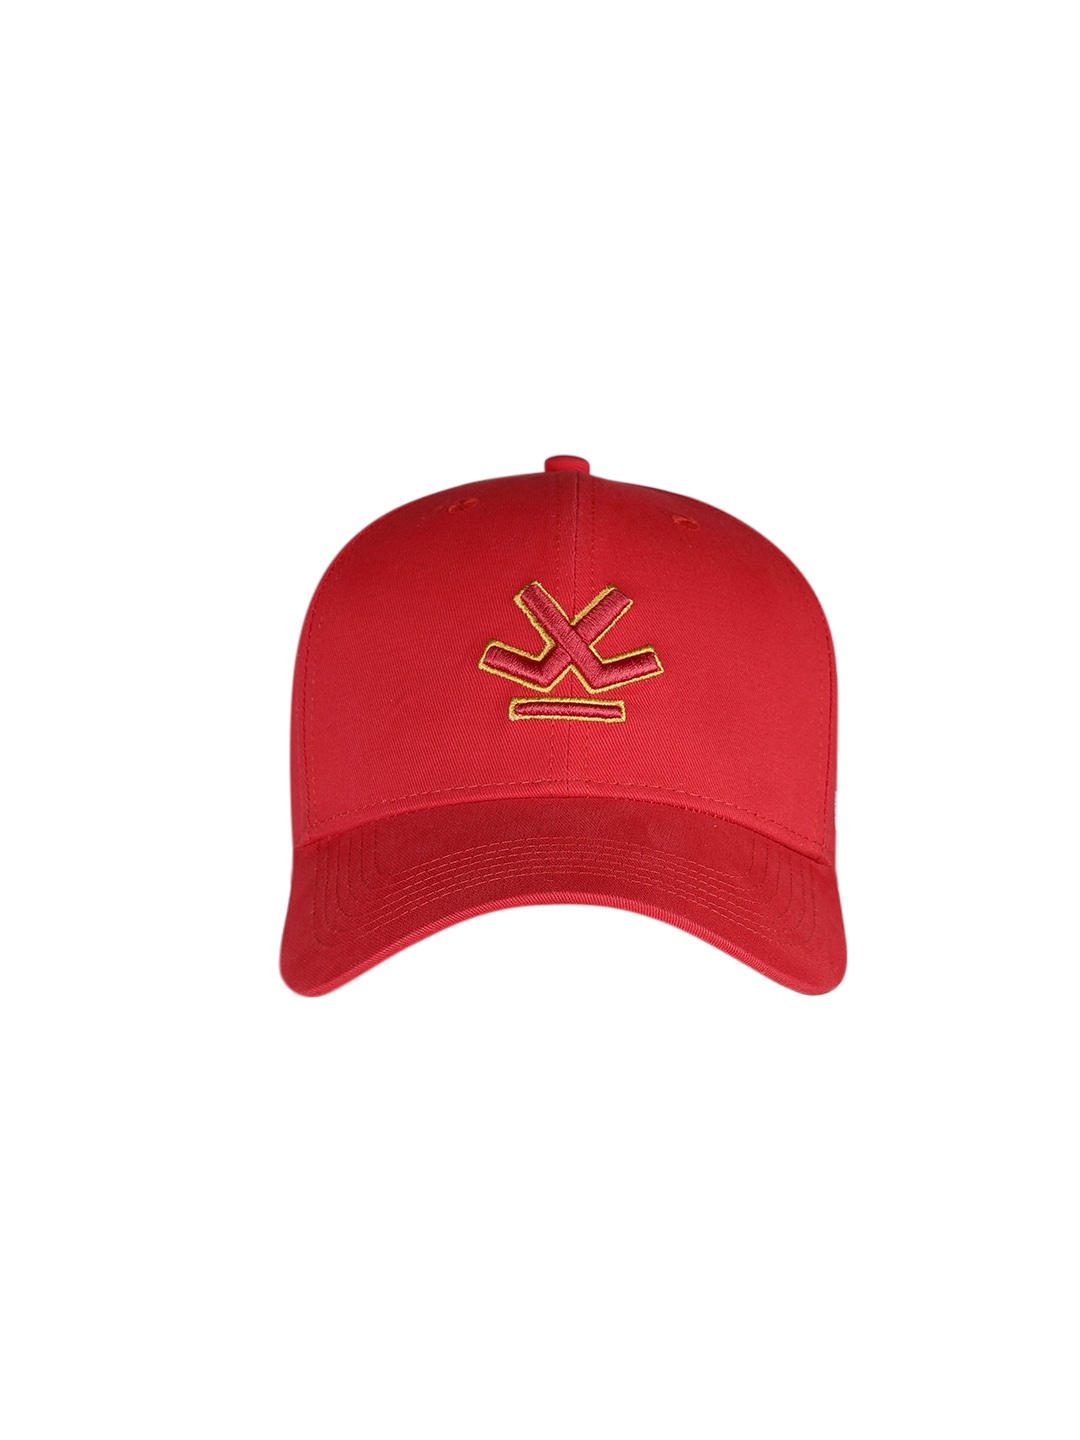 WROGN Unisex Red Embroidered Baseball Cap Price in India